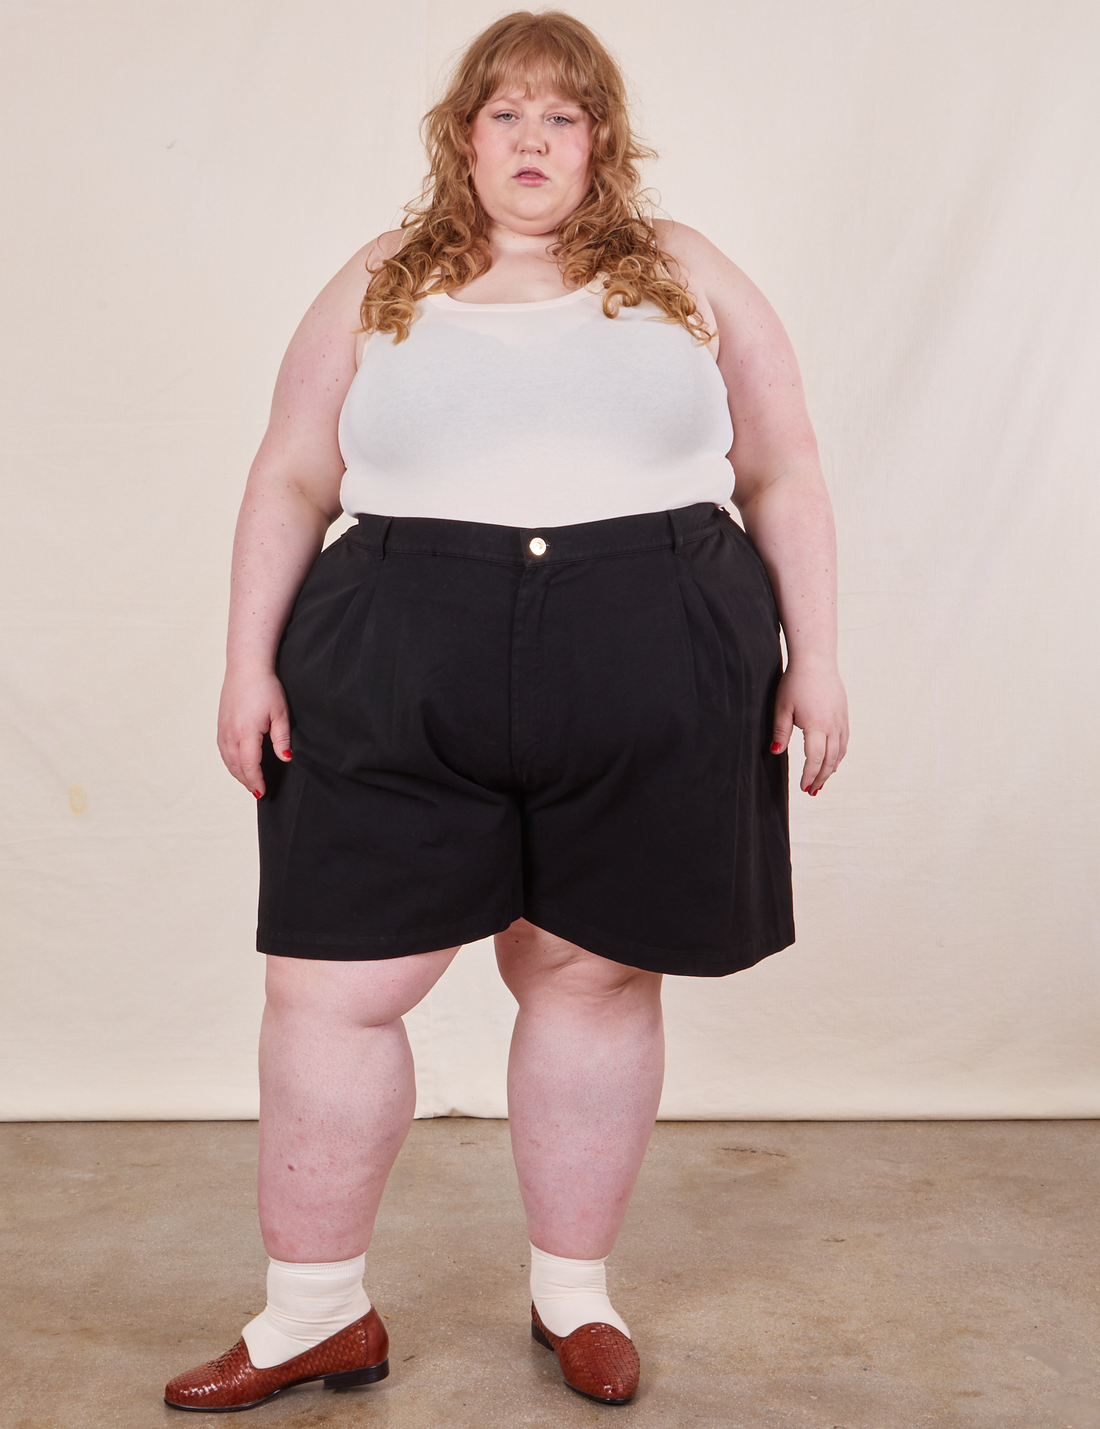 Catie is 5'11" and wearing 4XL Trouser Shorts in Basic Black paired with a vintage off-white Tank Top